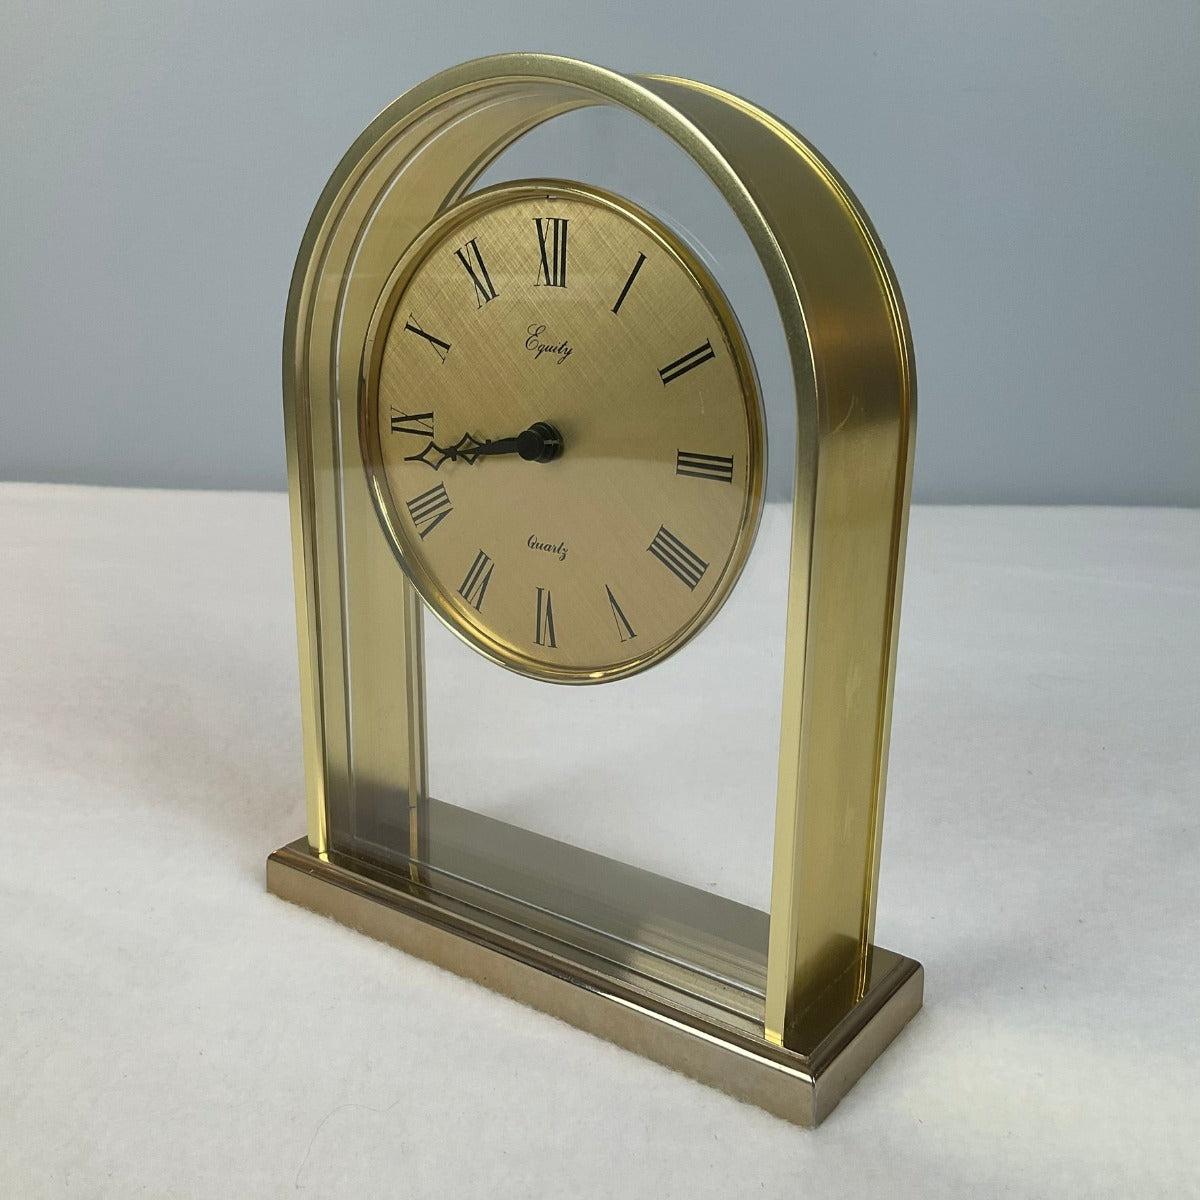 Equity Clock Quartz Vintage Analog Table Mantle Clock in Brass - Side View